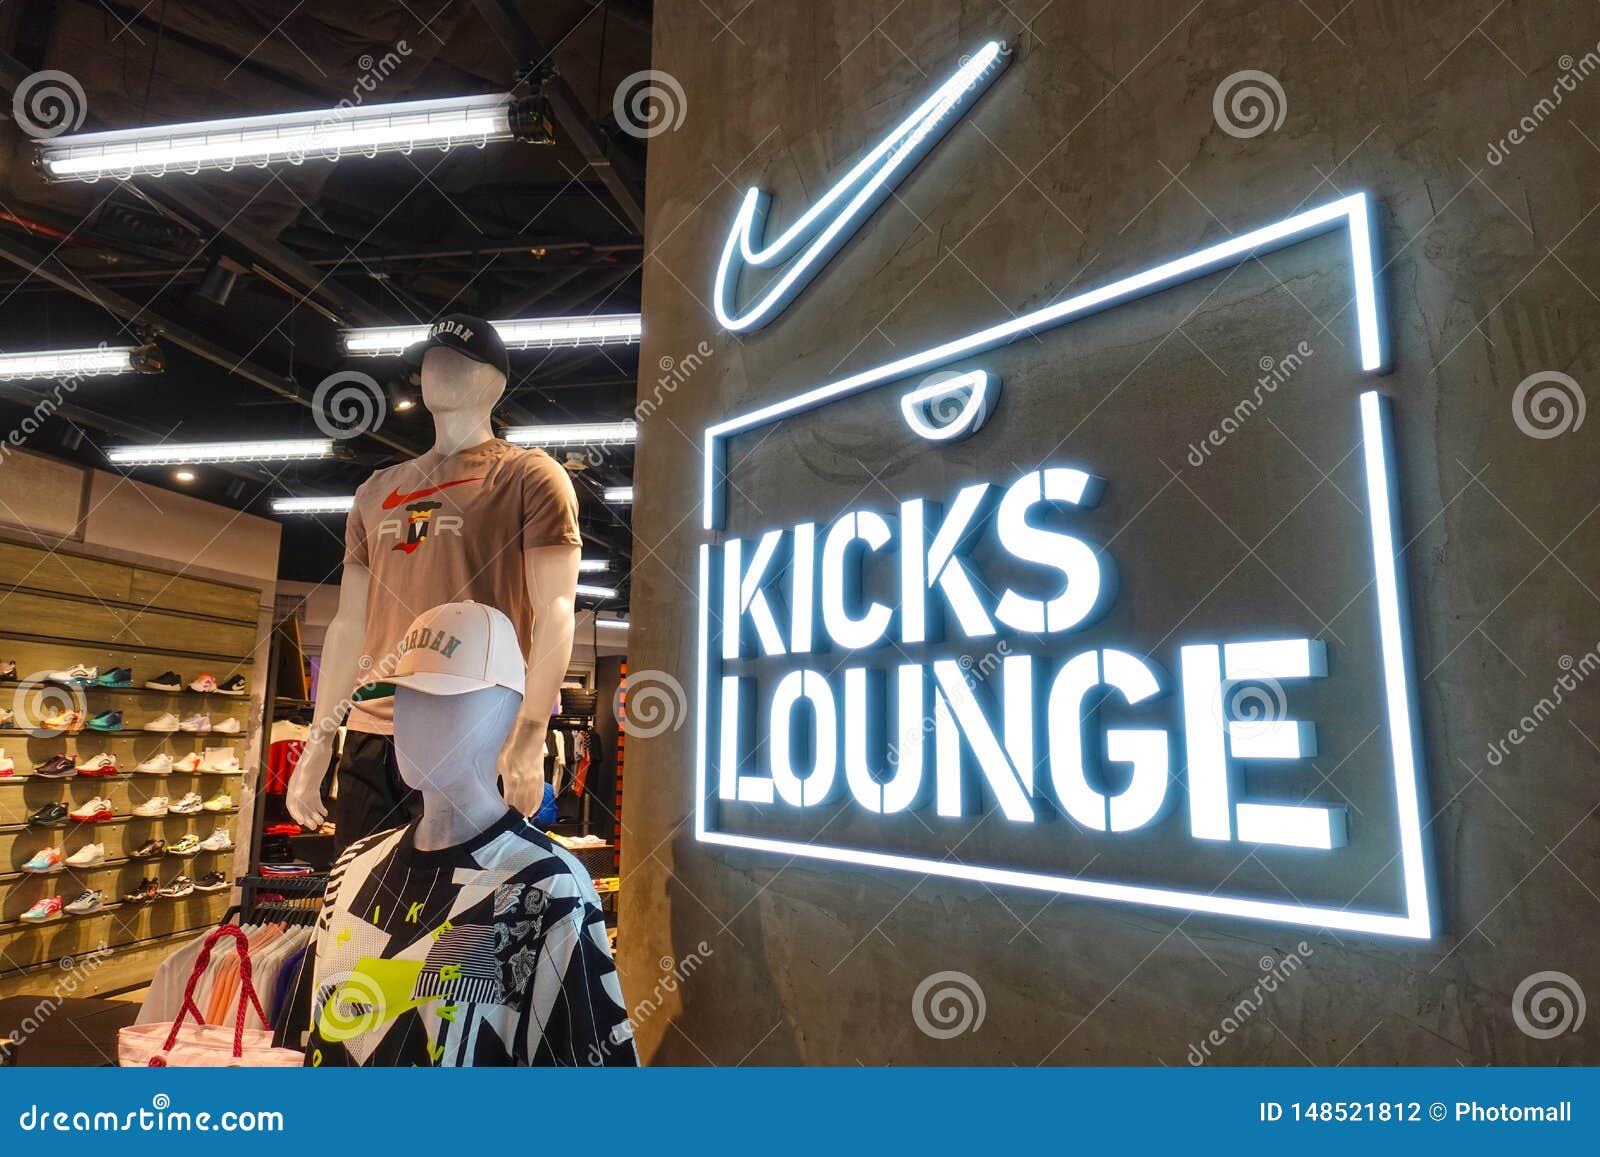 Nike Kicks Lounge Sports Retail Shop Editorial Photography - Image of isolated, background: